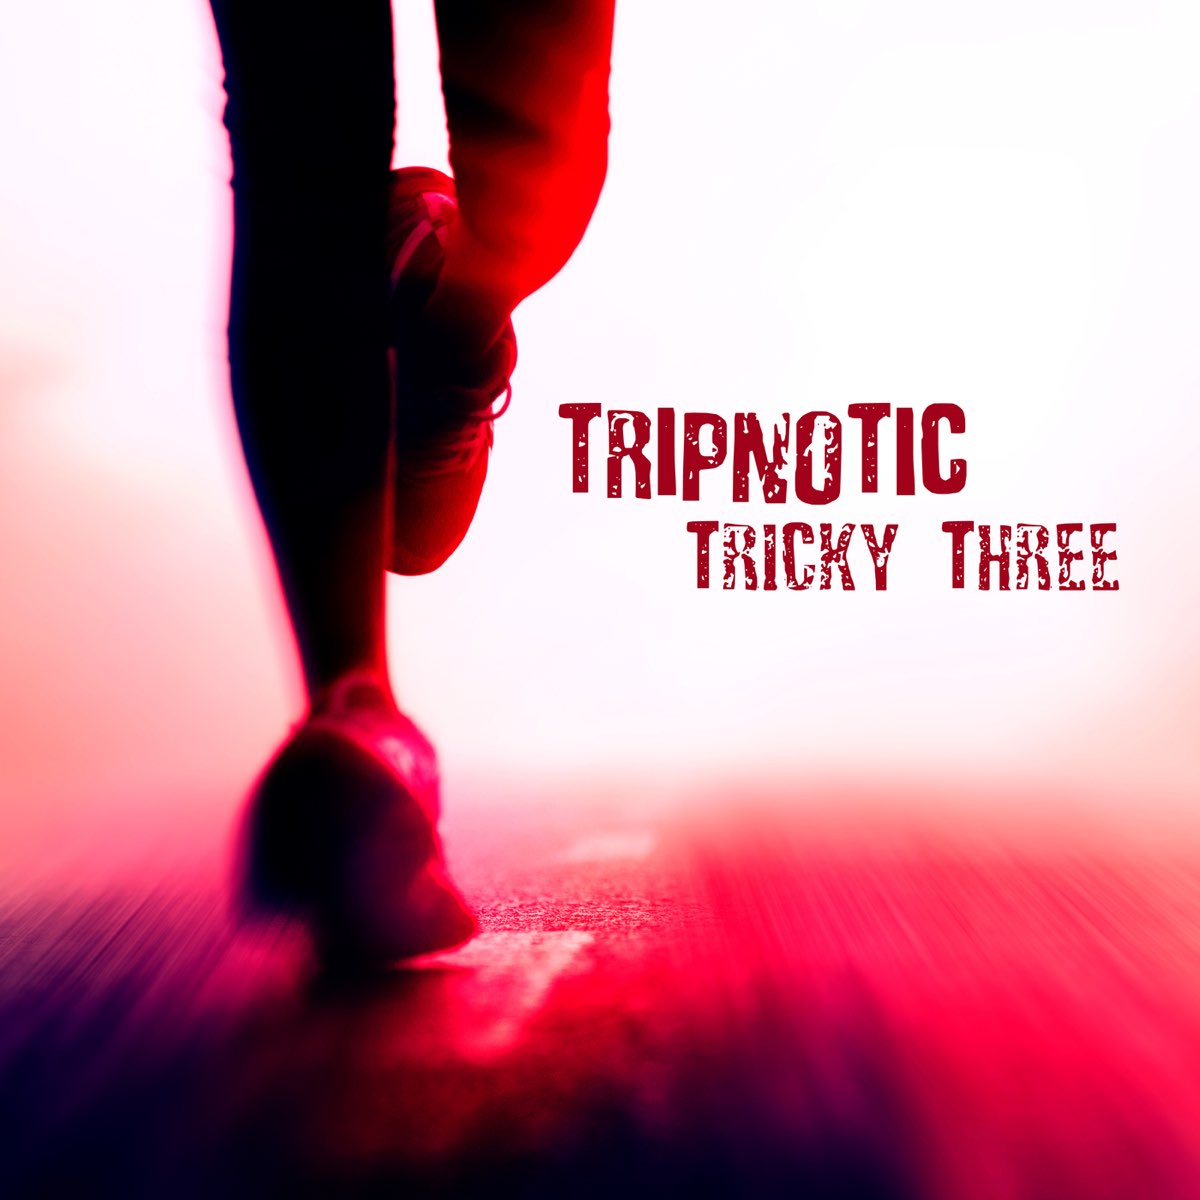 Tricky albums. Time to Dance tricky певица. This is tricky песня